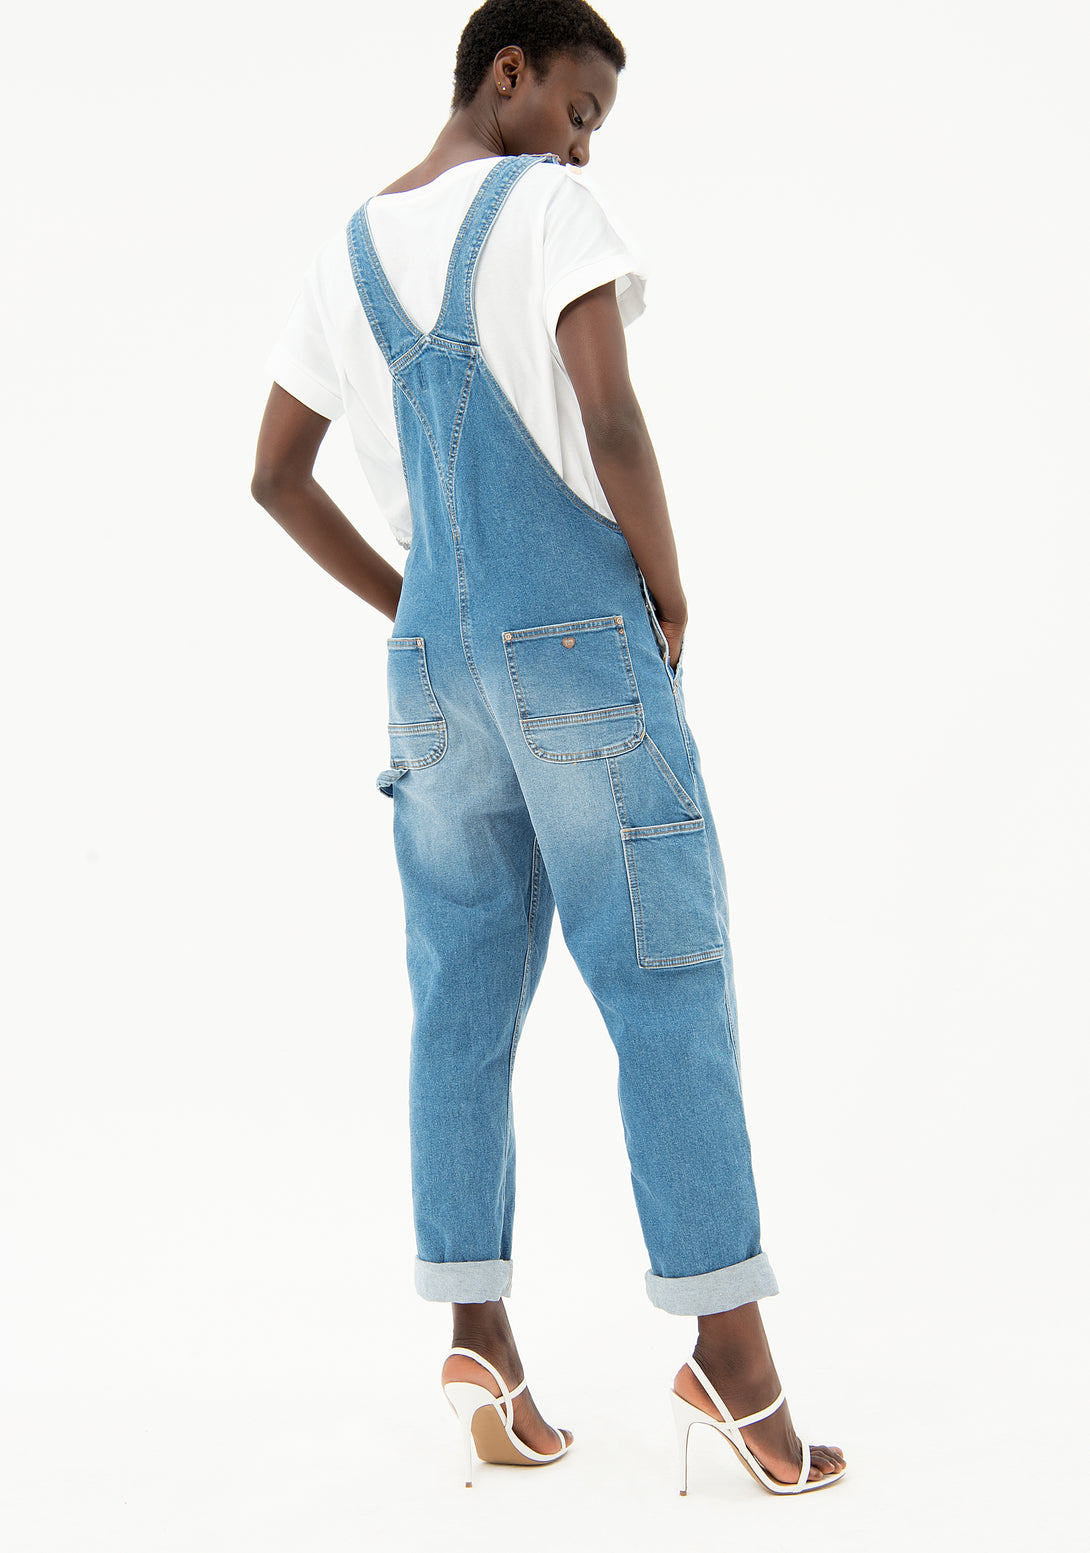 Overalls regular fit made in denim with middle wash